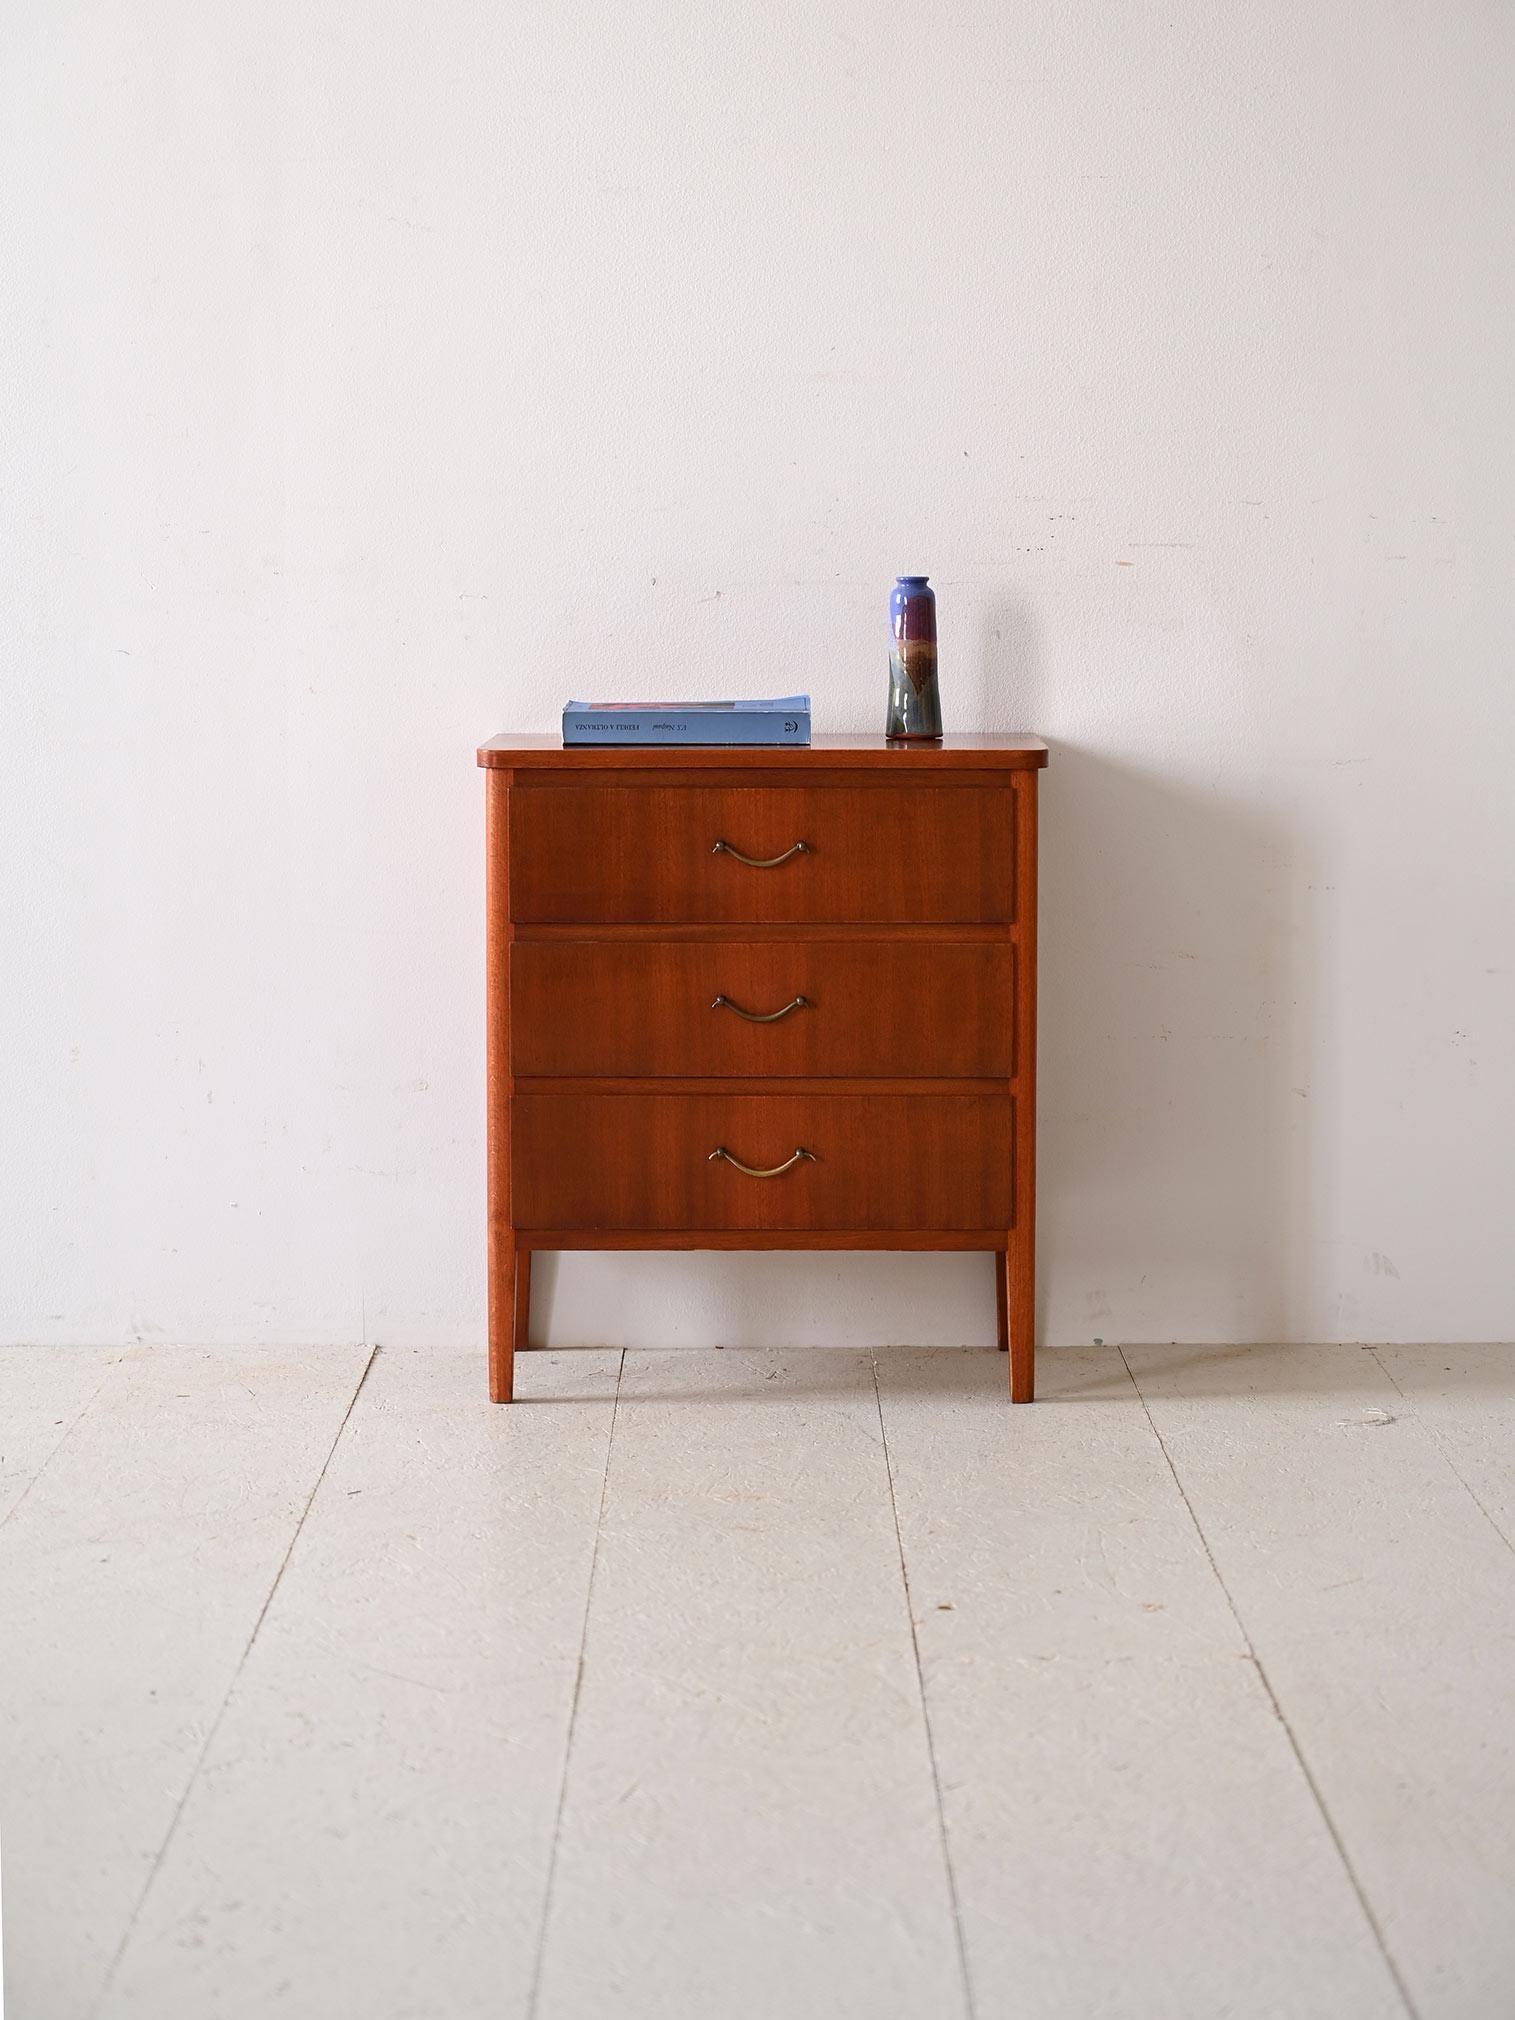 Cabinet with three drawers of vintage Scandinavian manufacture.

Perfect for adding a touch of mid-century style, this retro-flavored chest of drawers is perfect for use as a nightstand in the bedroom.
The understated and elegant structure is